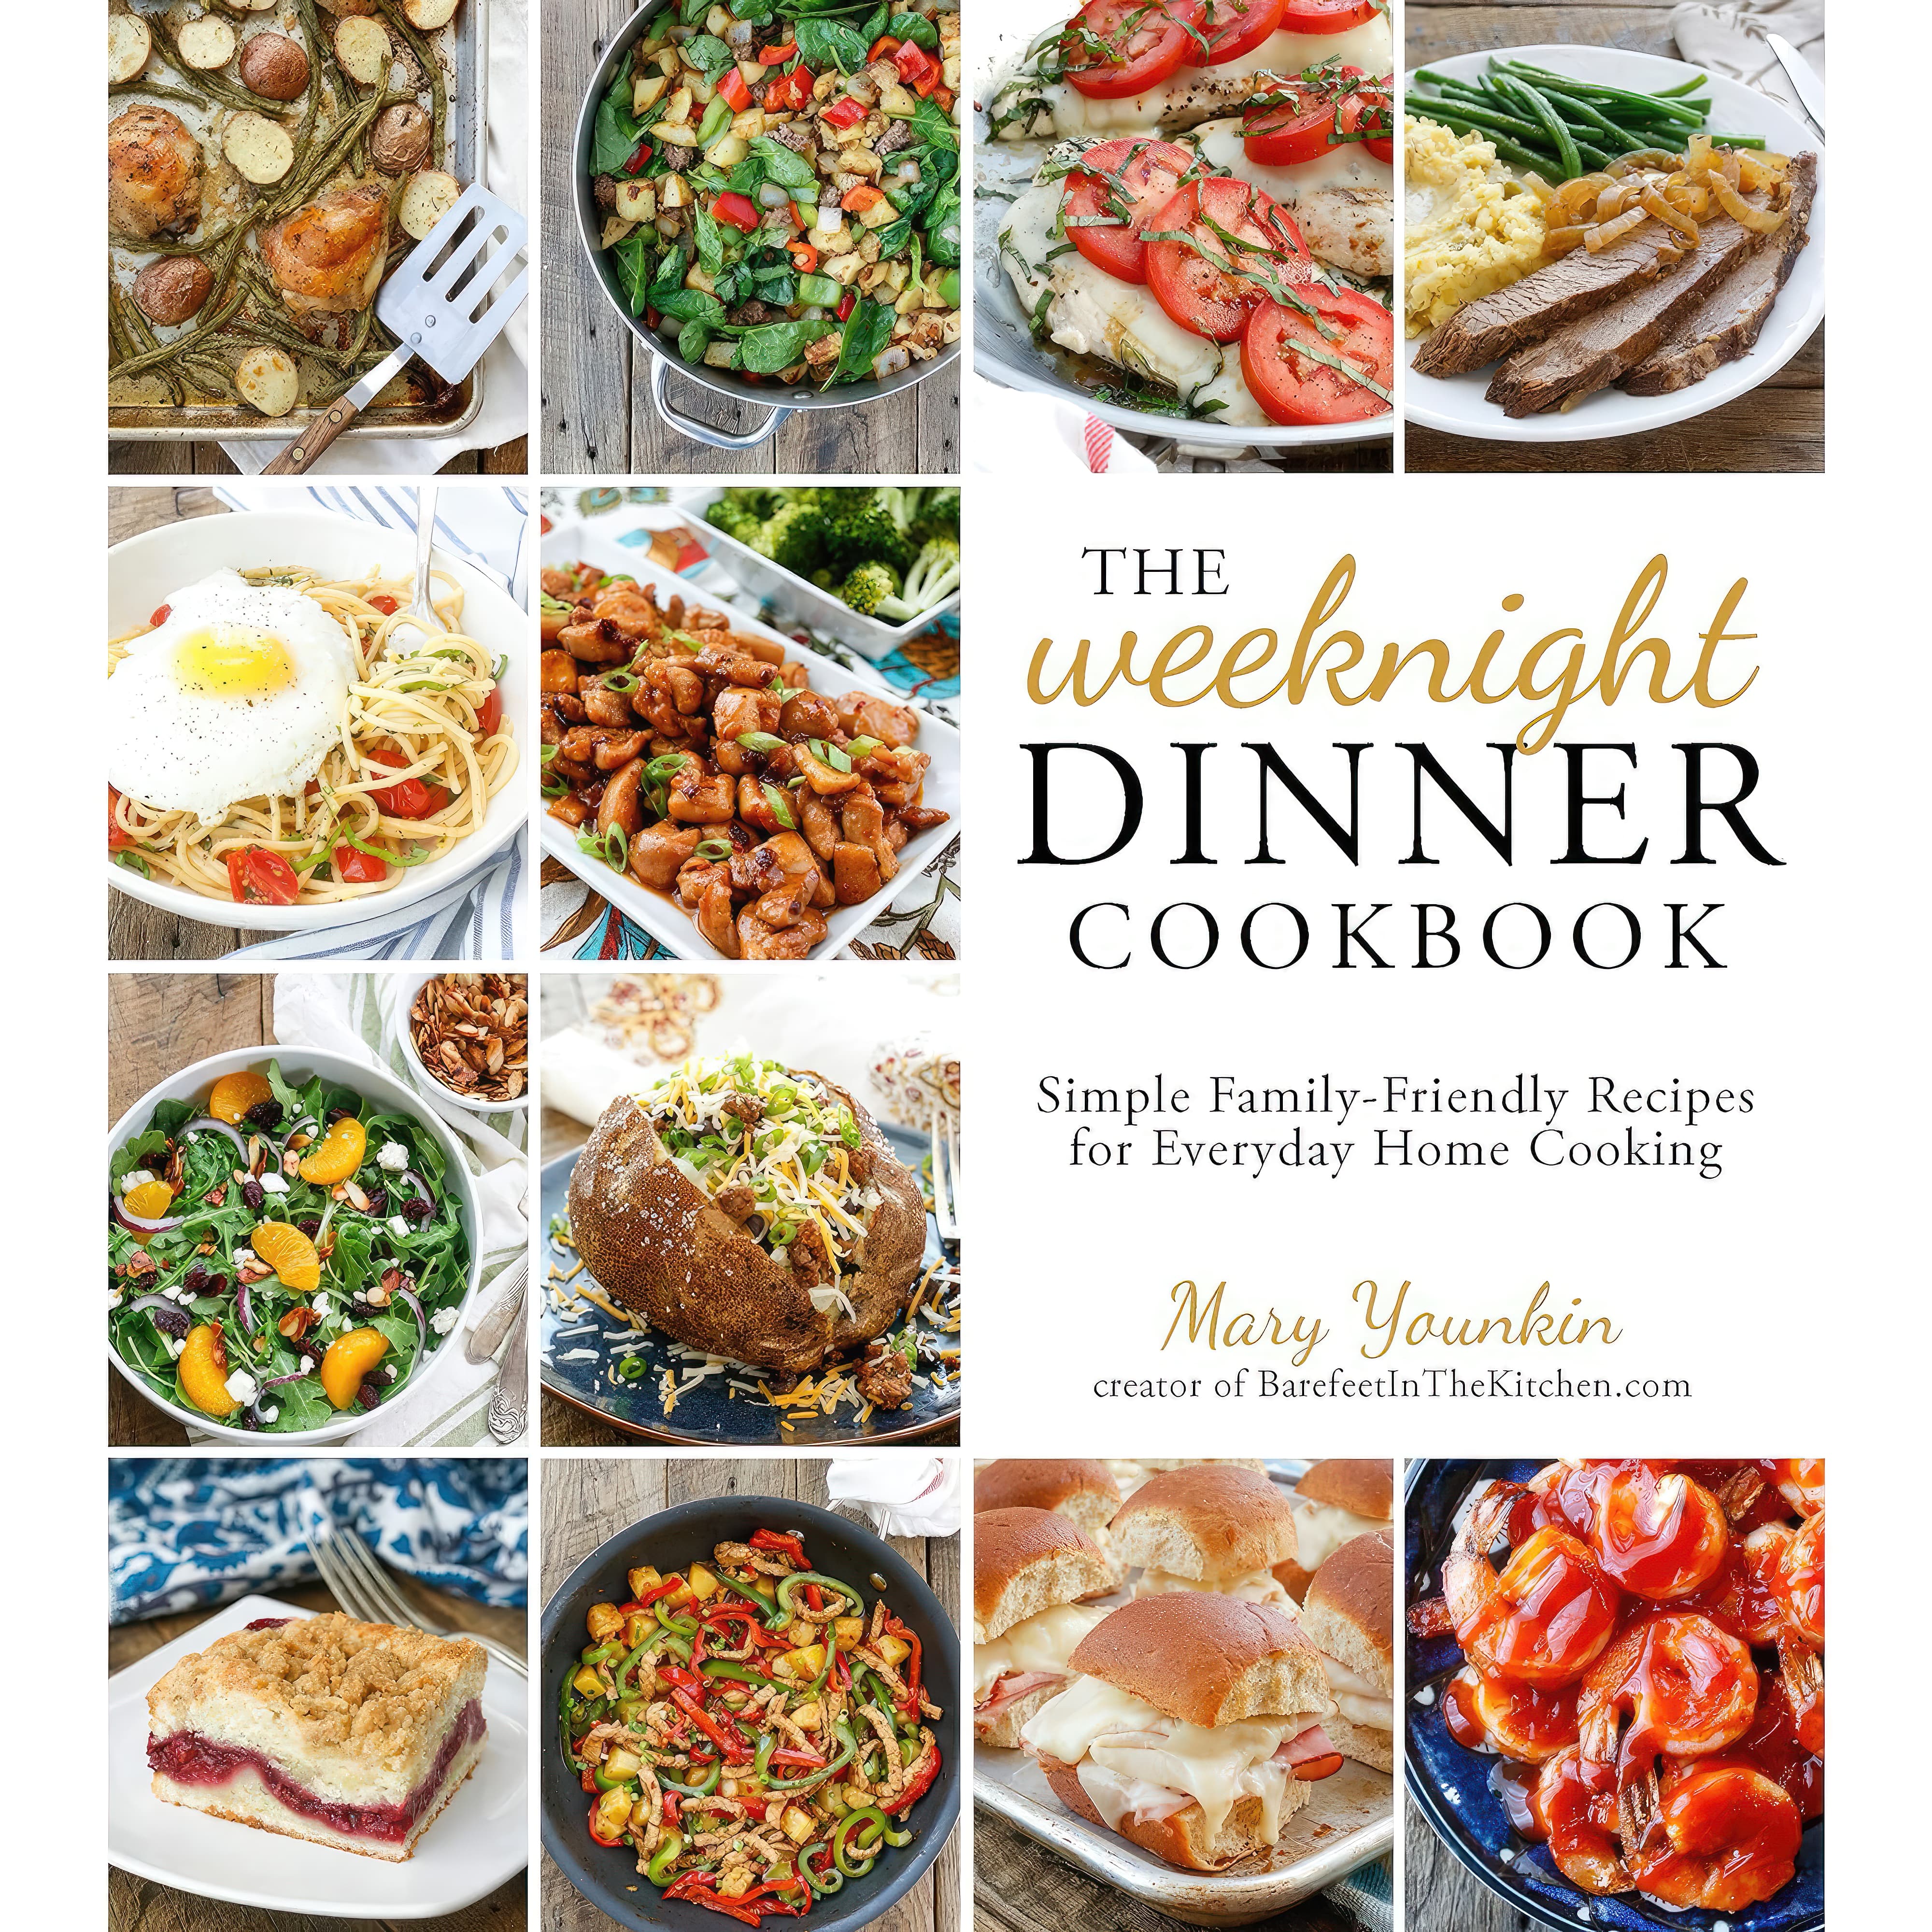 The Weeknight Dinner Cookbook by Mary Younkin book cover